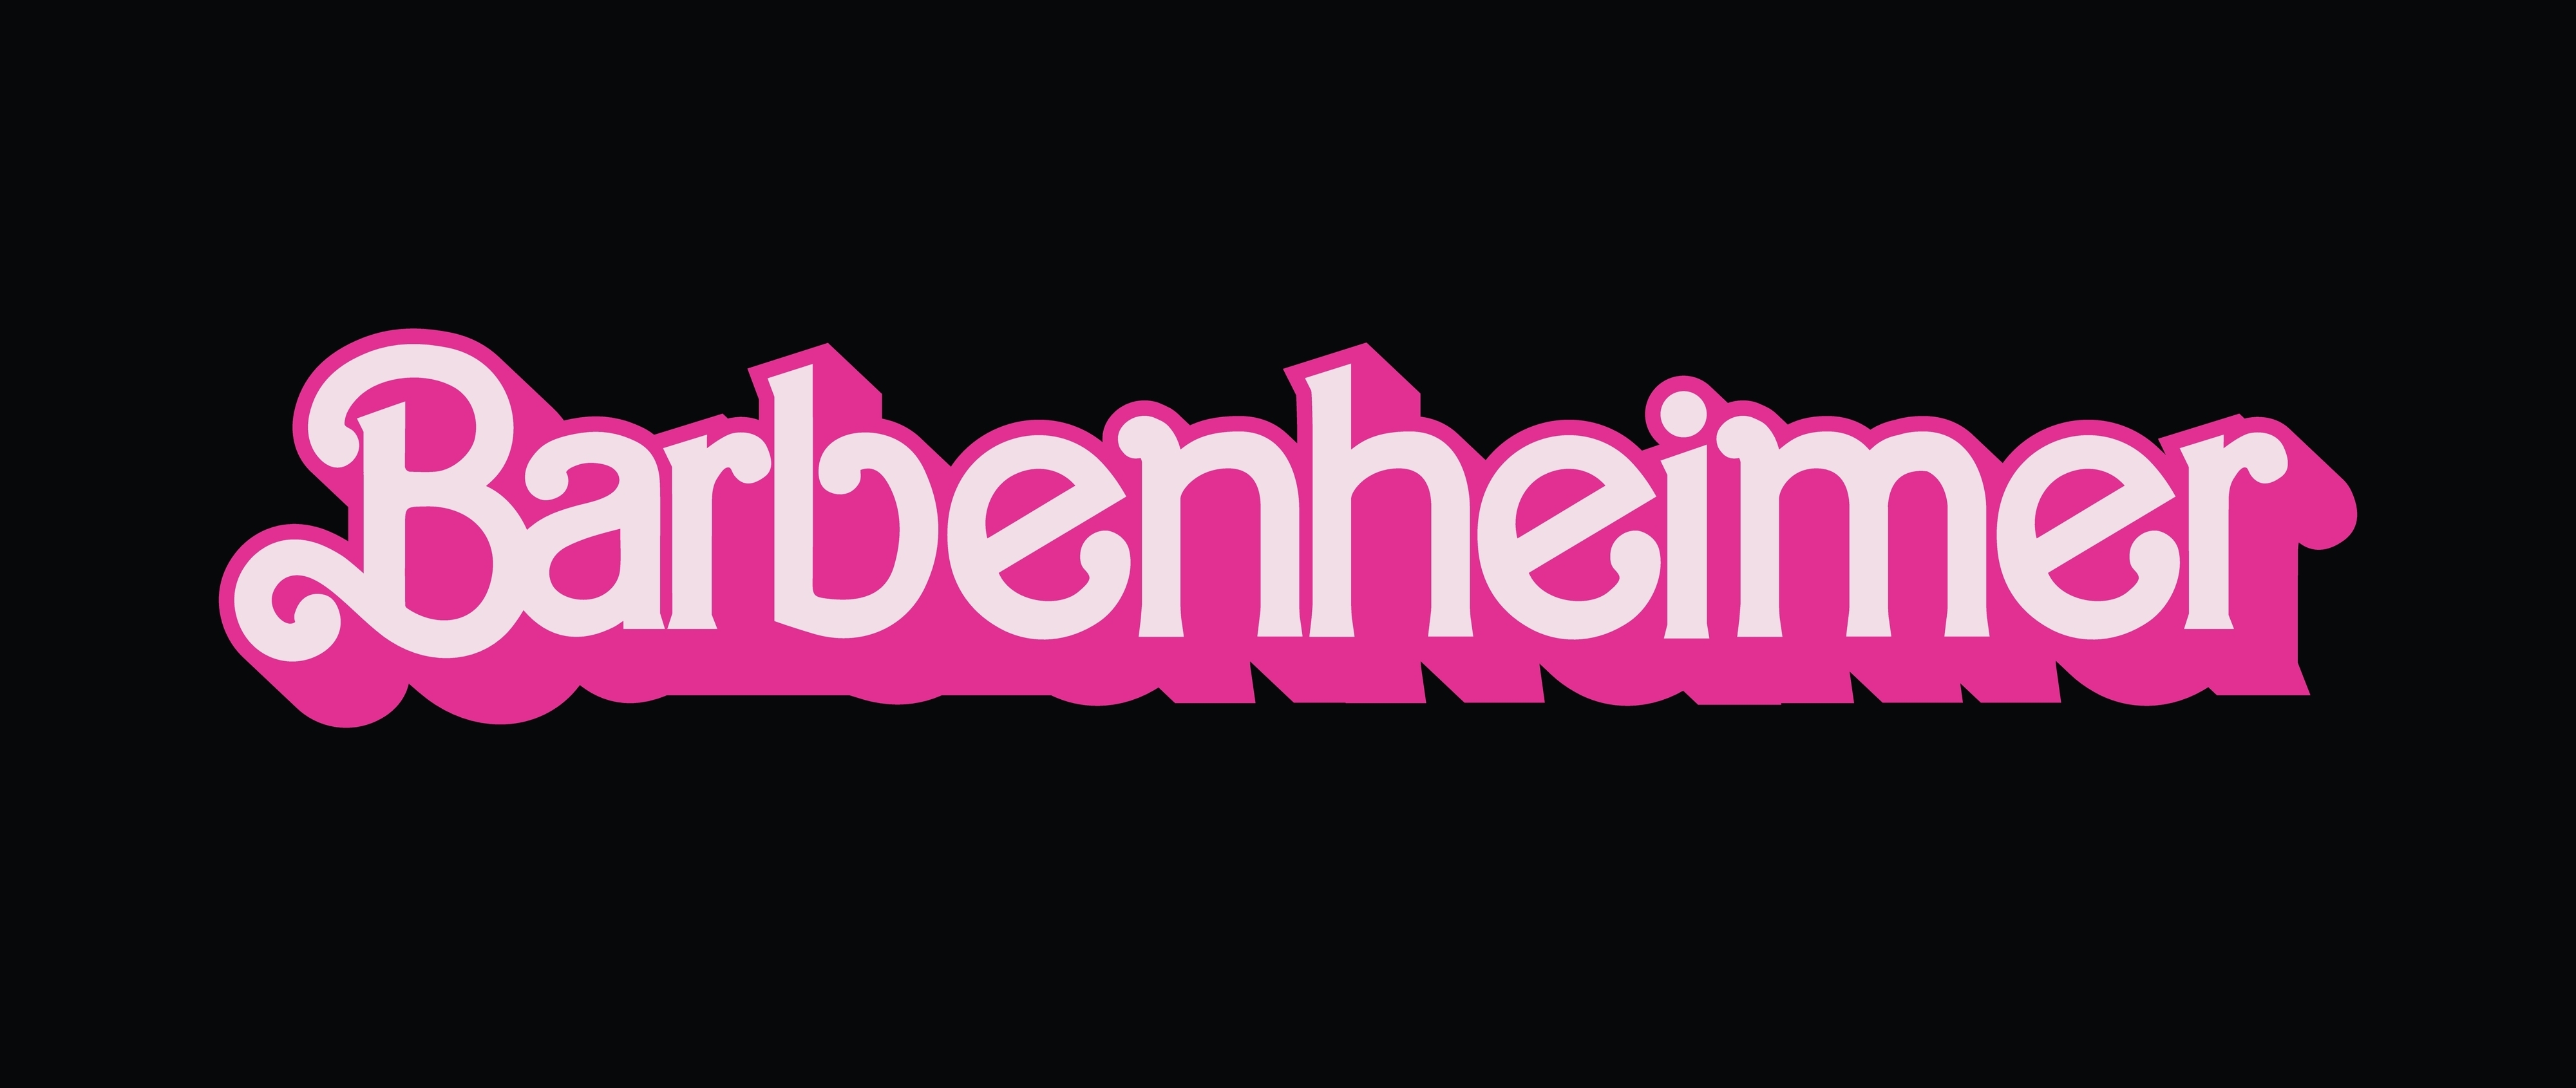 'Barbenheimer' text in a pink Barbie branded font